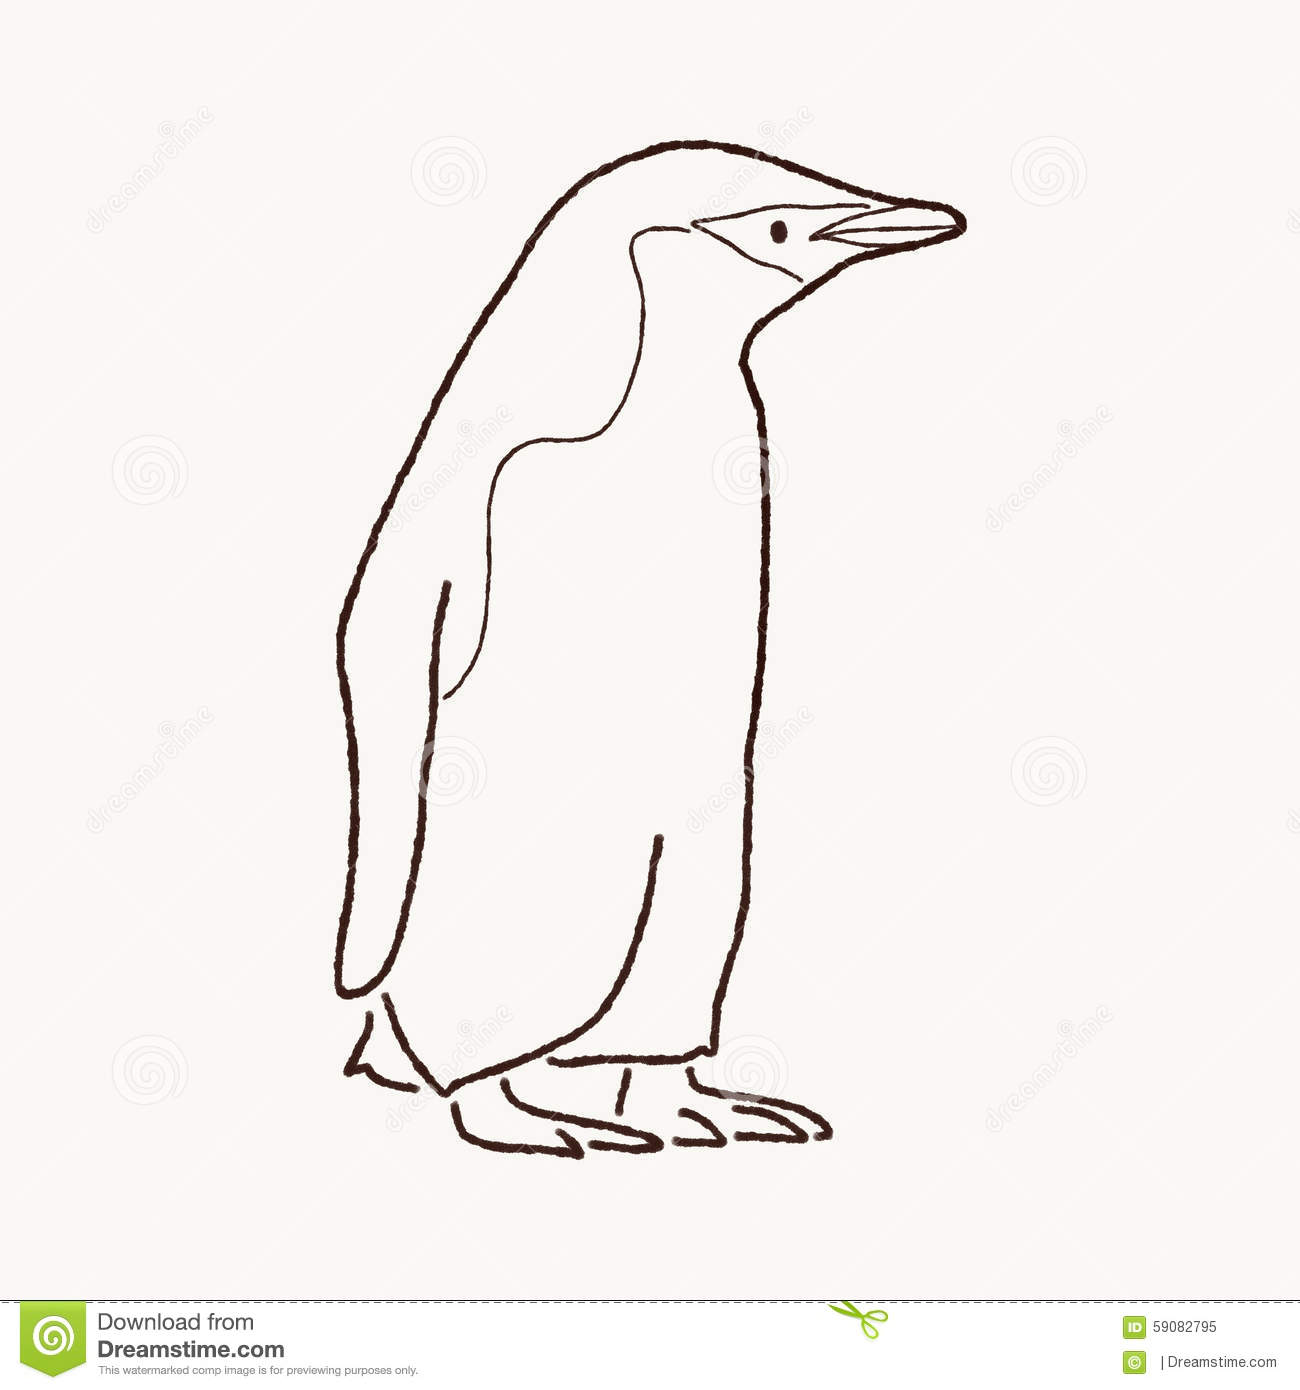 Chinstrap penguin clipart.